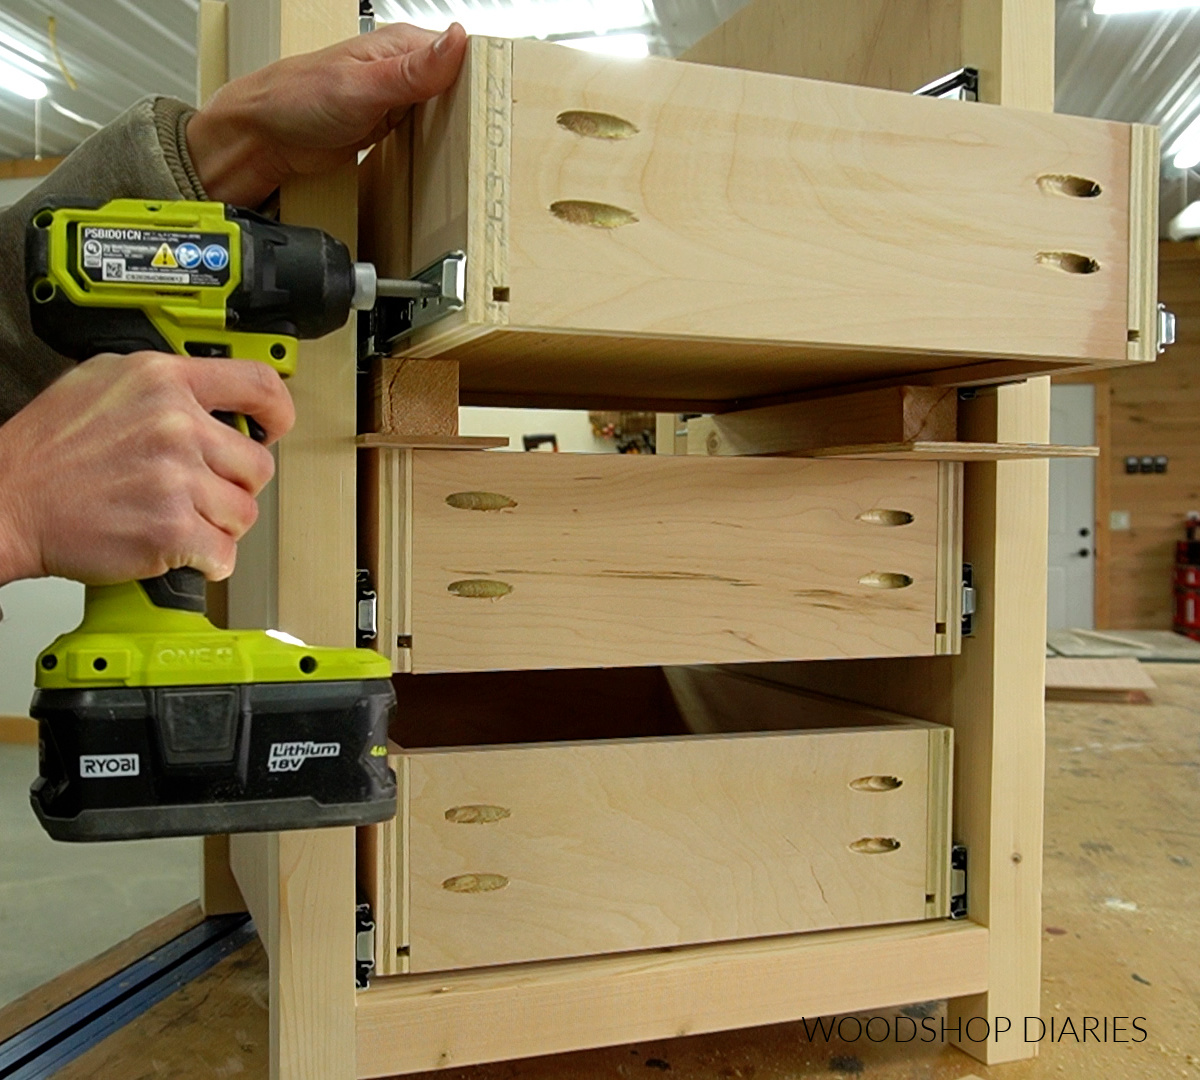 Using spacer blocks to space out drawer boxes during installation